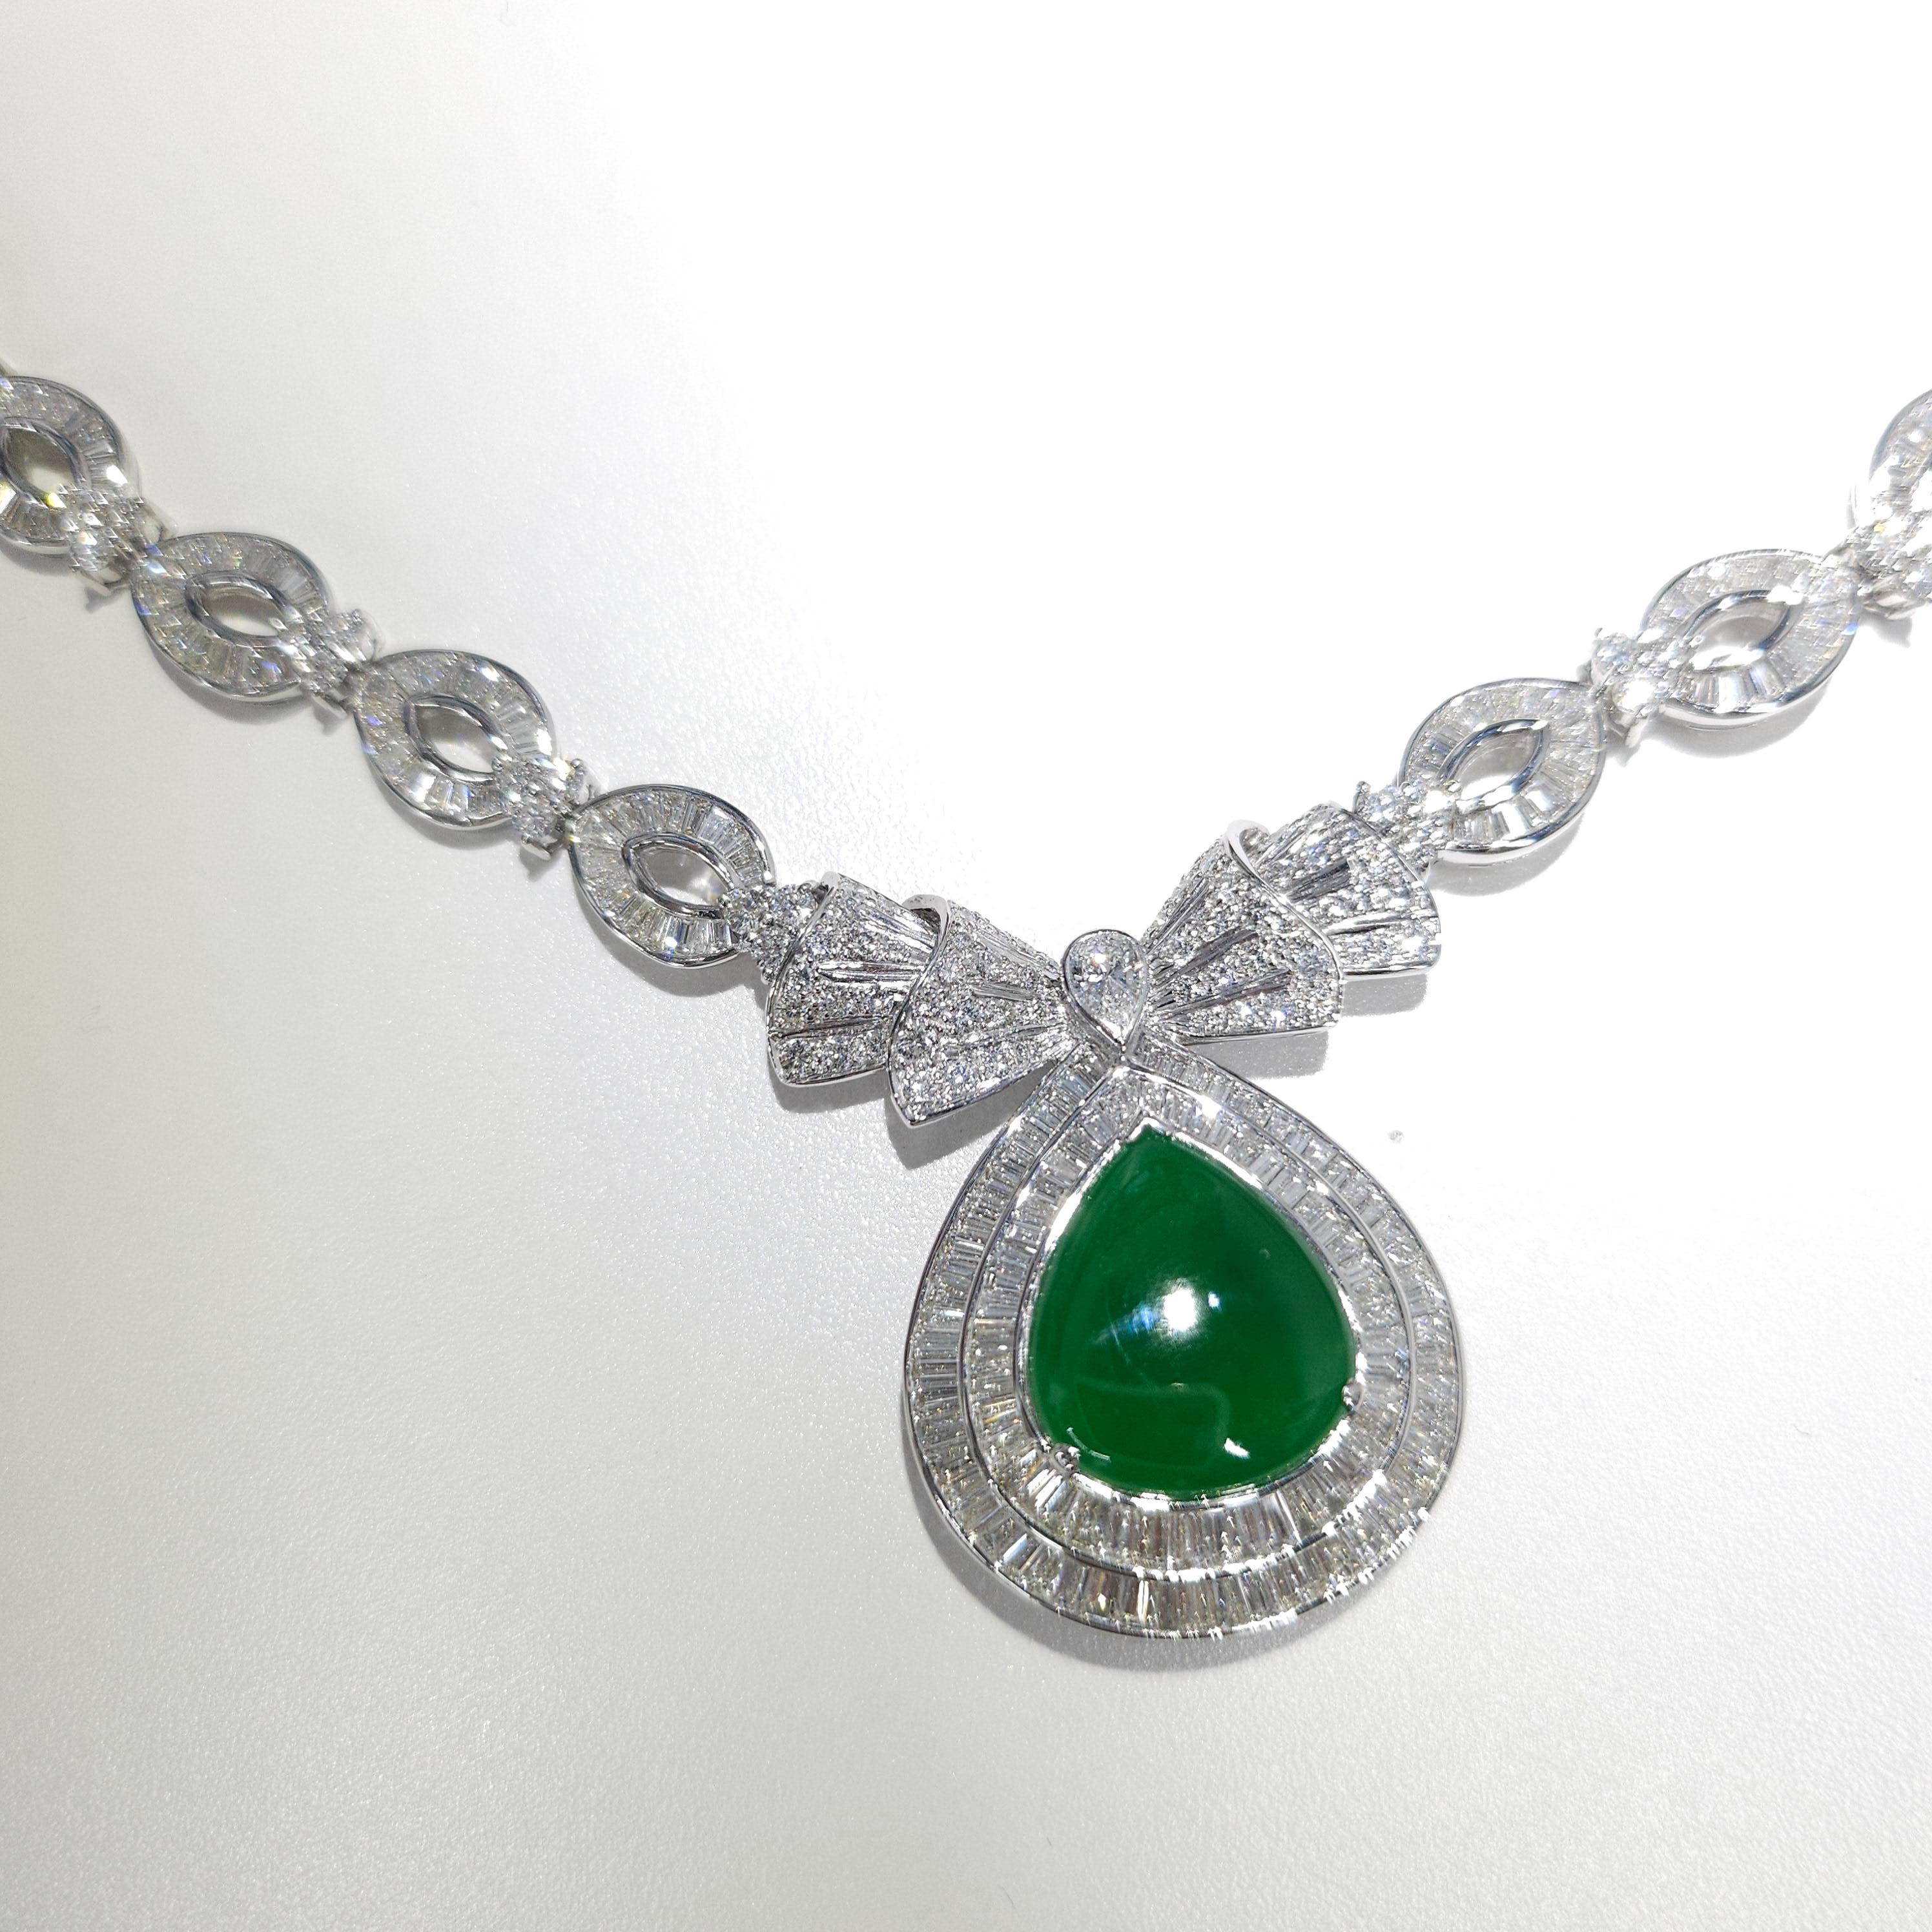 Certified Untreated Jadite Jade and 18Ct Diamond Necklace Brooch 18K White Gold For Sale 3